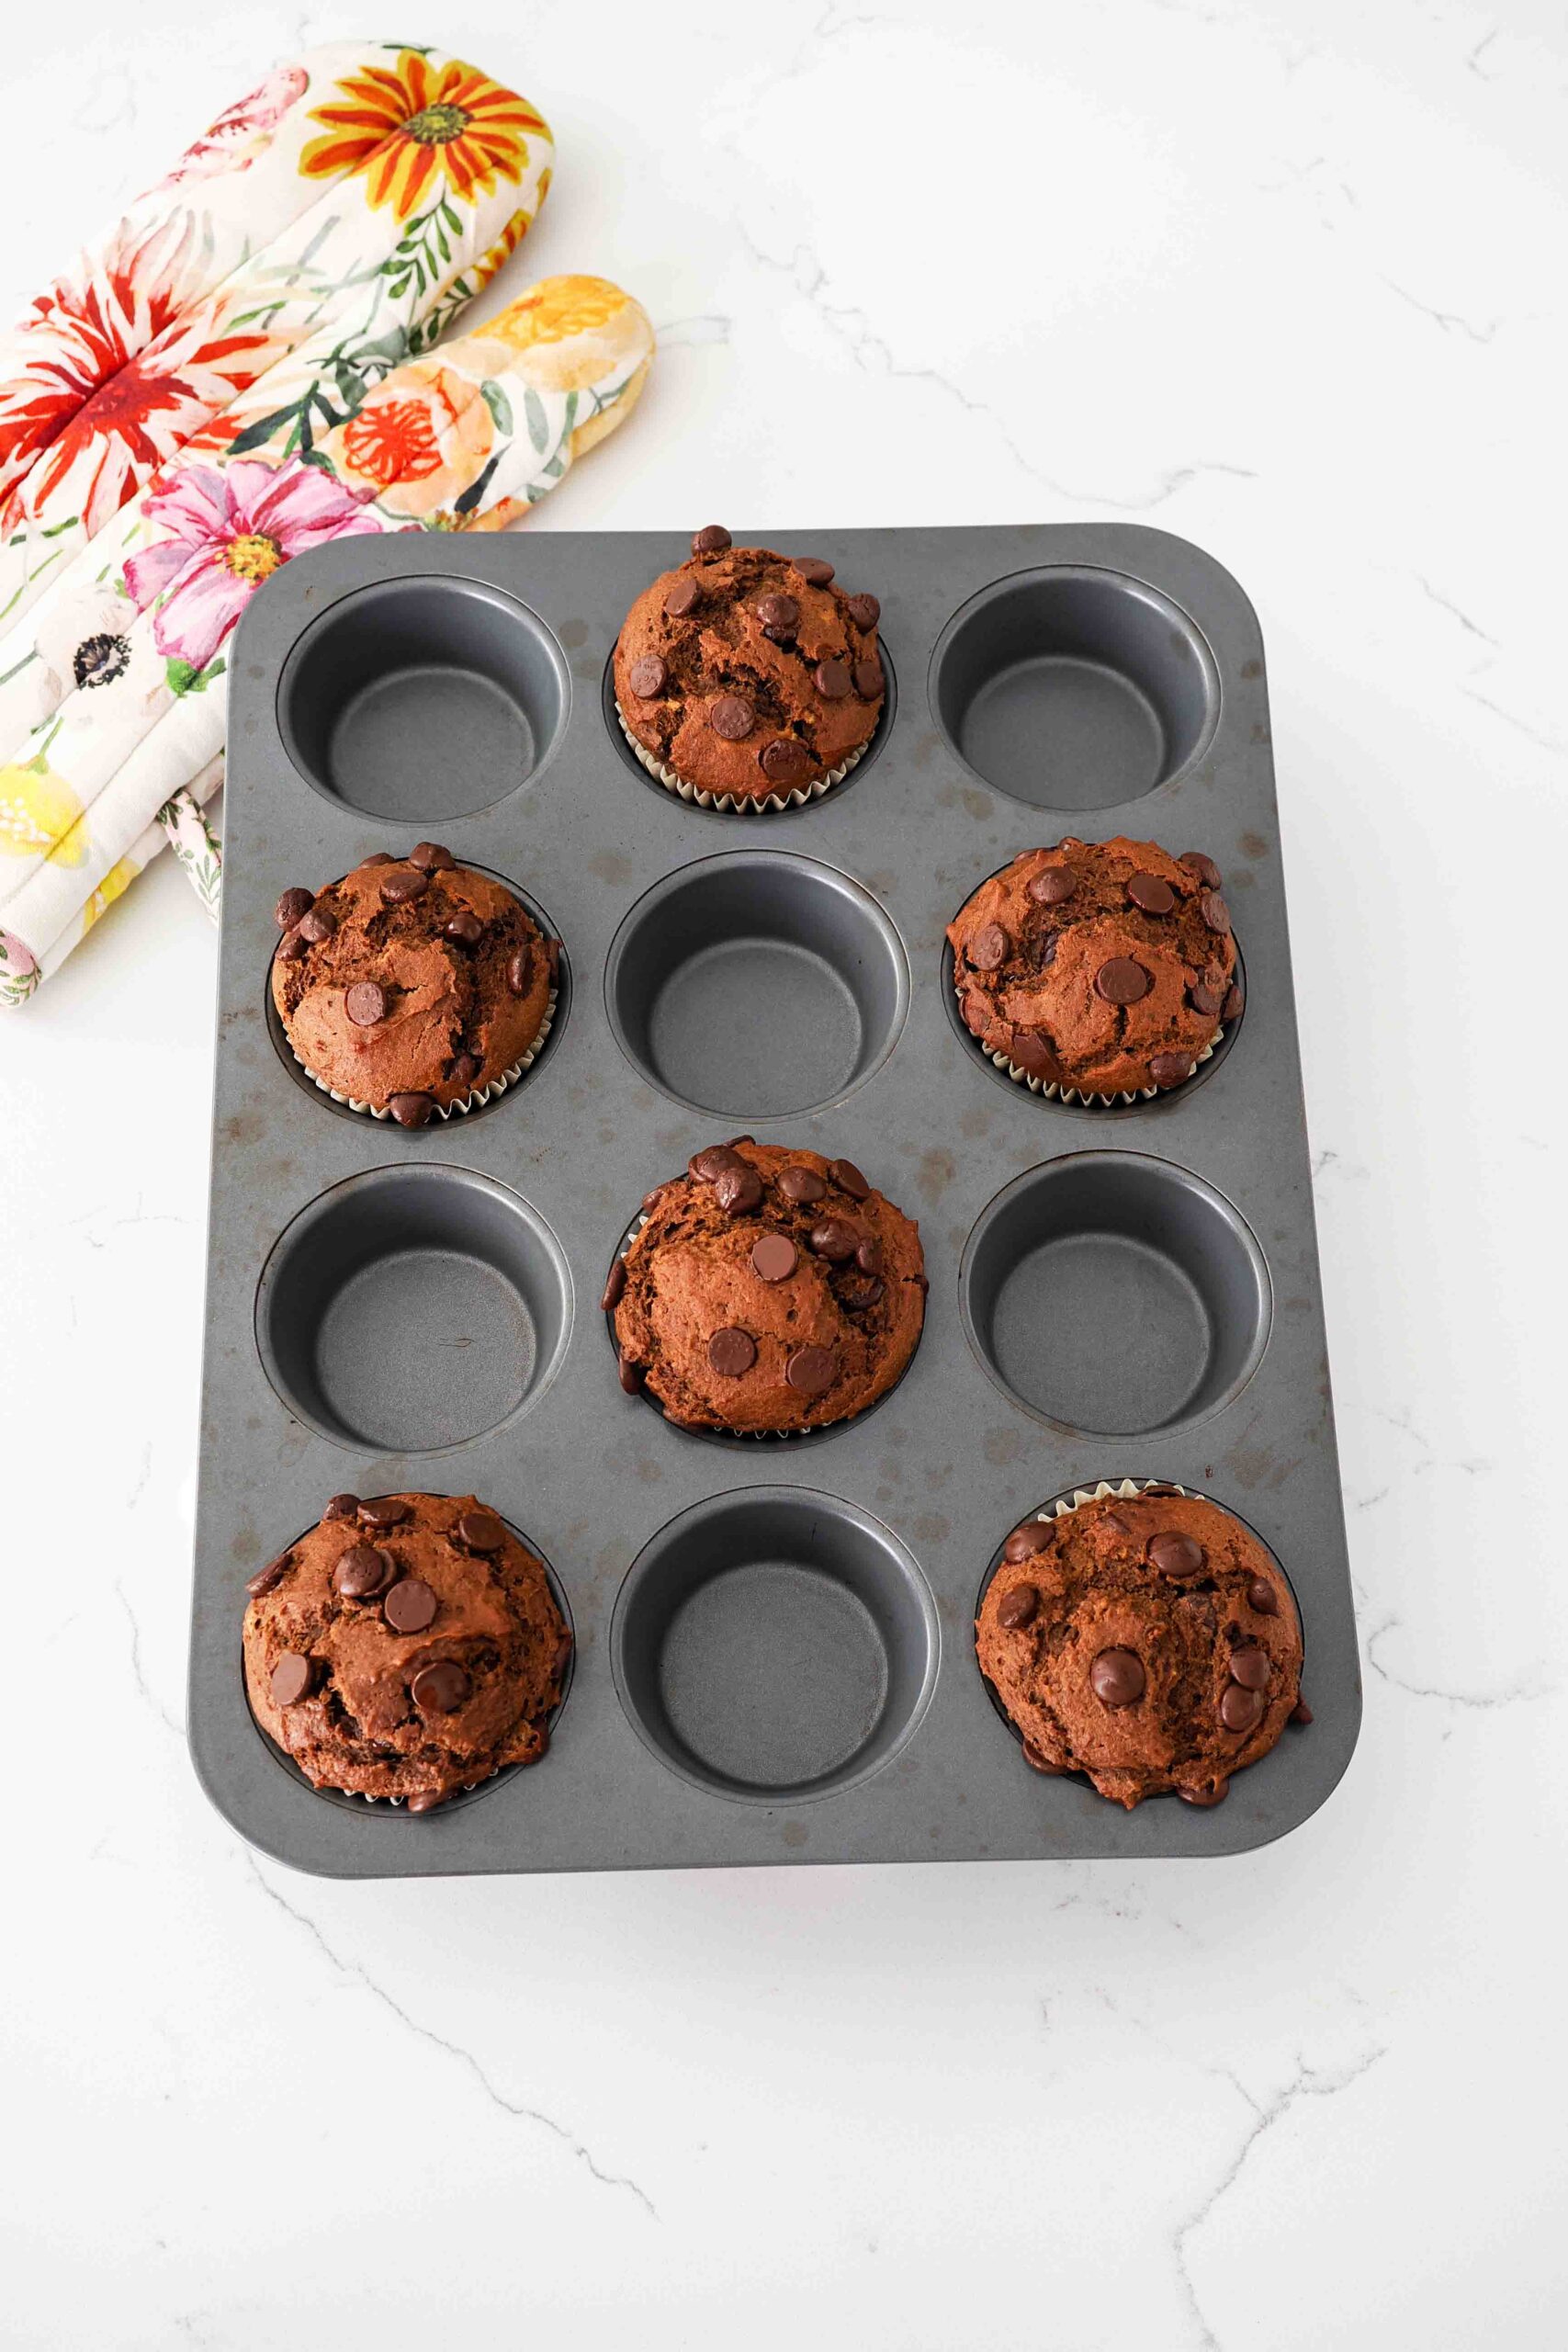 Fully baked large chocolate pumpkin muffins in a dark muffin pan.